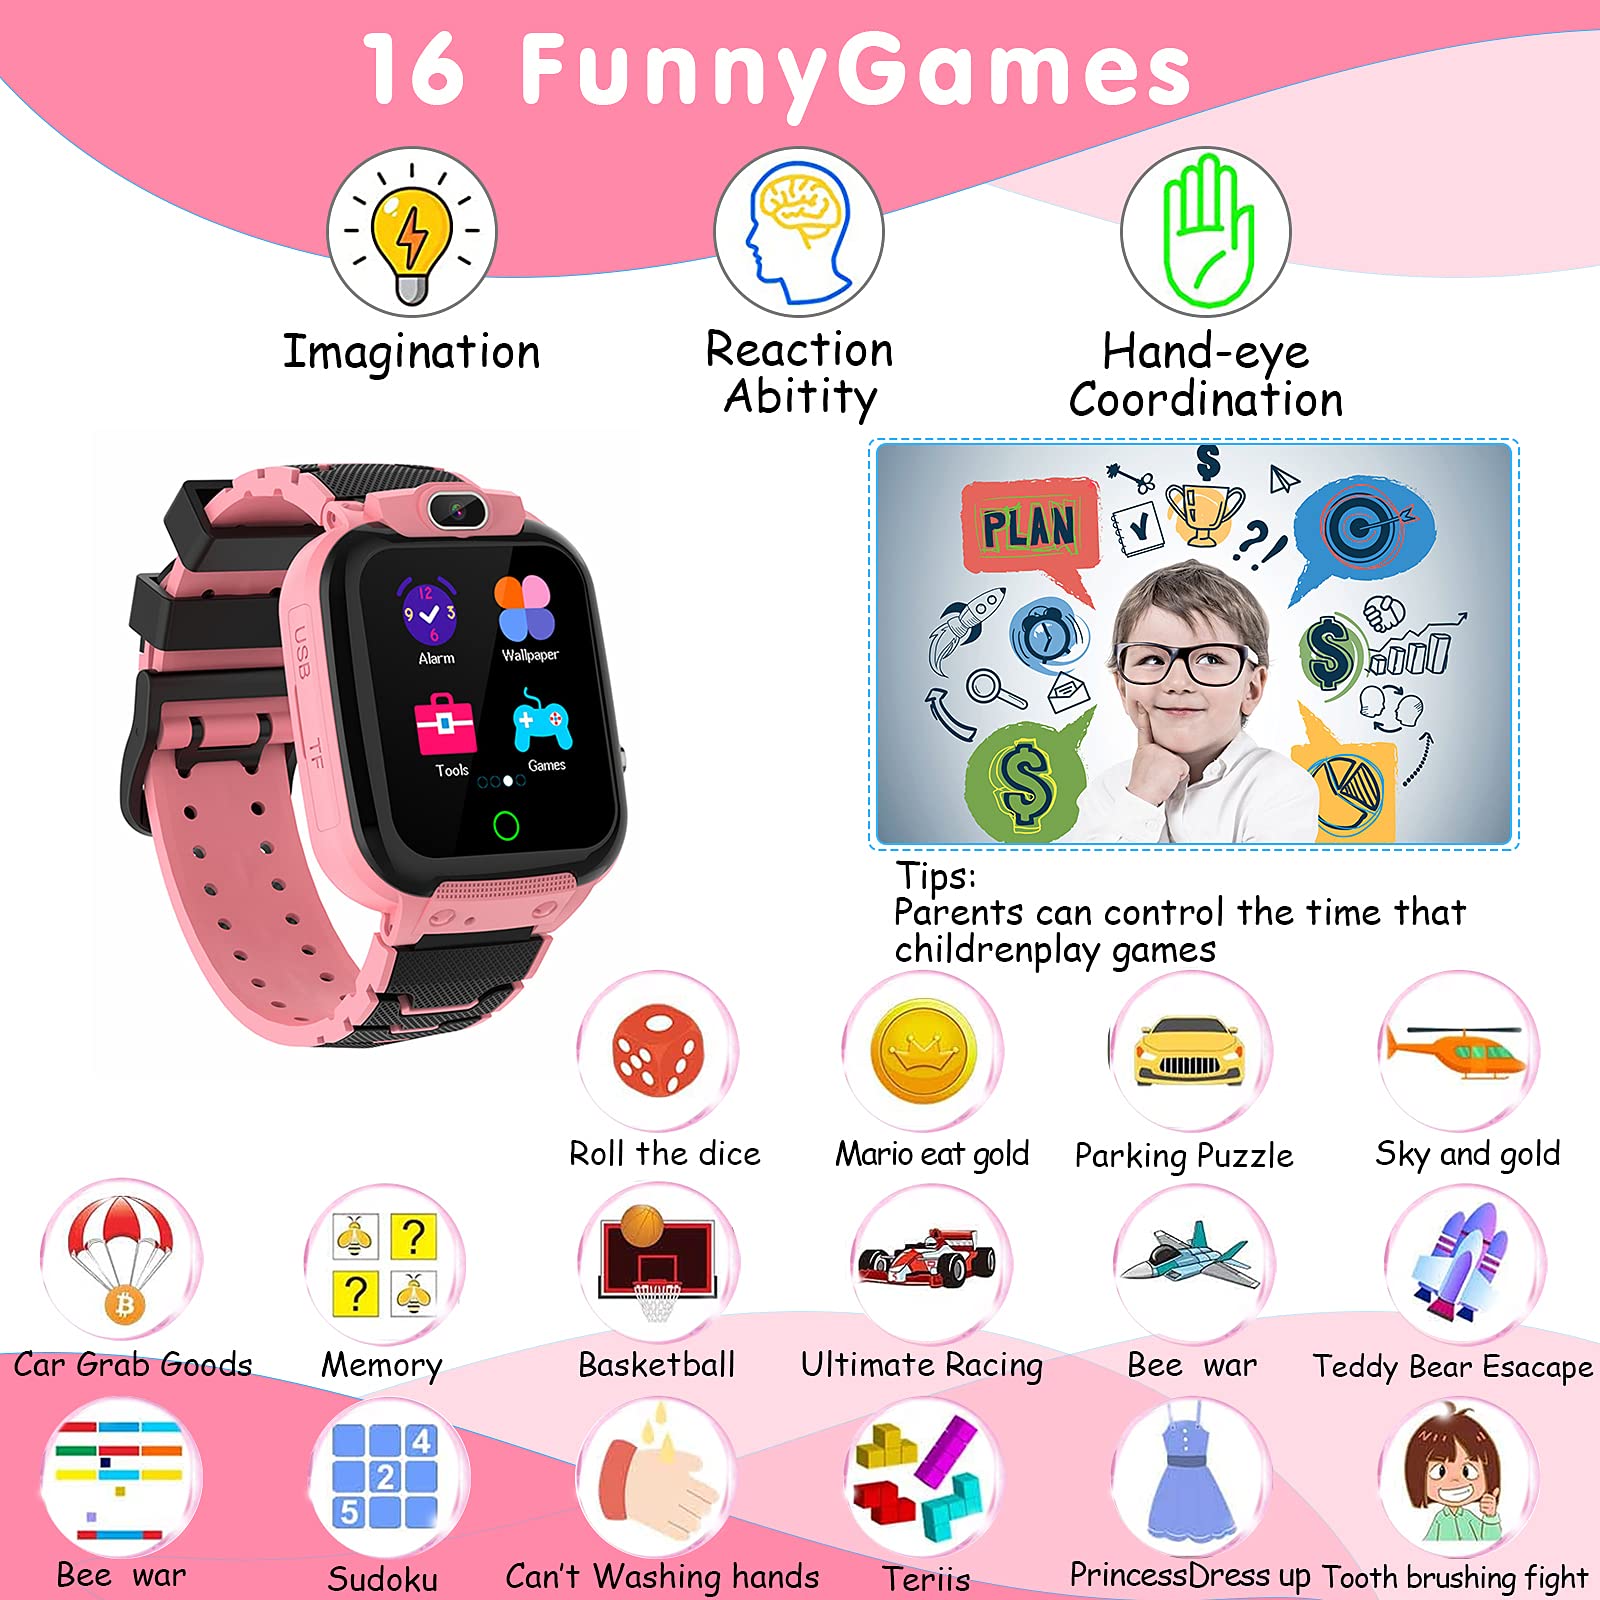 Vannico Kids Smart Watch, Video 16Games Music Player Smartwatch for Kids HD Camera 80MP Recorder Alarm Touch LCD for Boys Girls Children Birthday Gifts